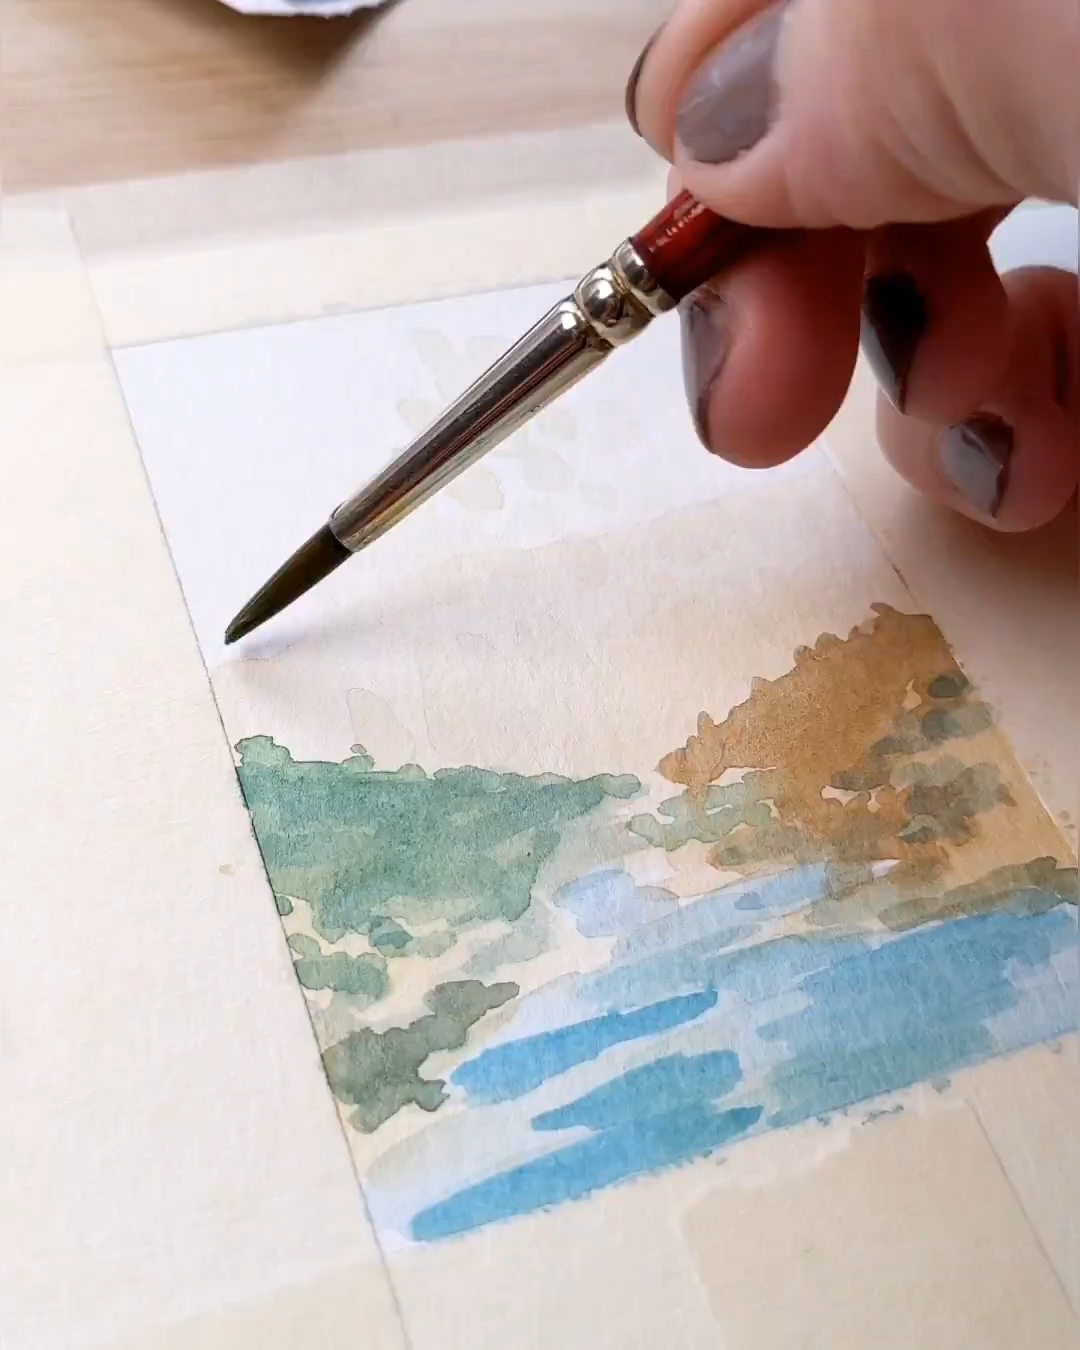 Painting a little landscape sketch | Kim Everhard Art: Shop Art for your home inspired by nature. - Painting a little landscape sketch | Kim Everhard Art: Shop Art for your home inspired by nature. -   16 beauty Inspiration art ideas